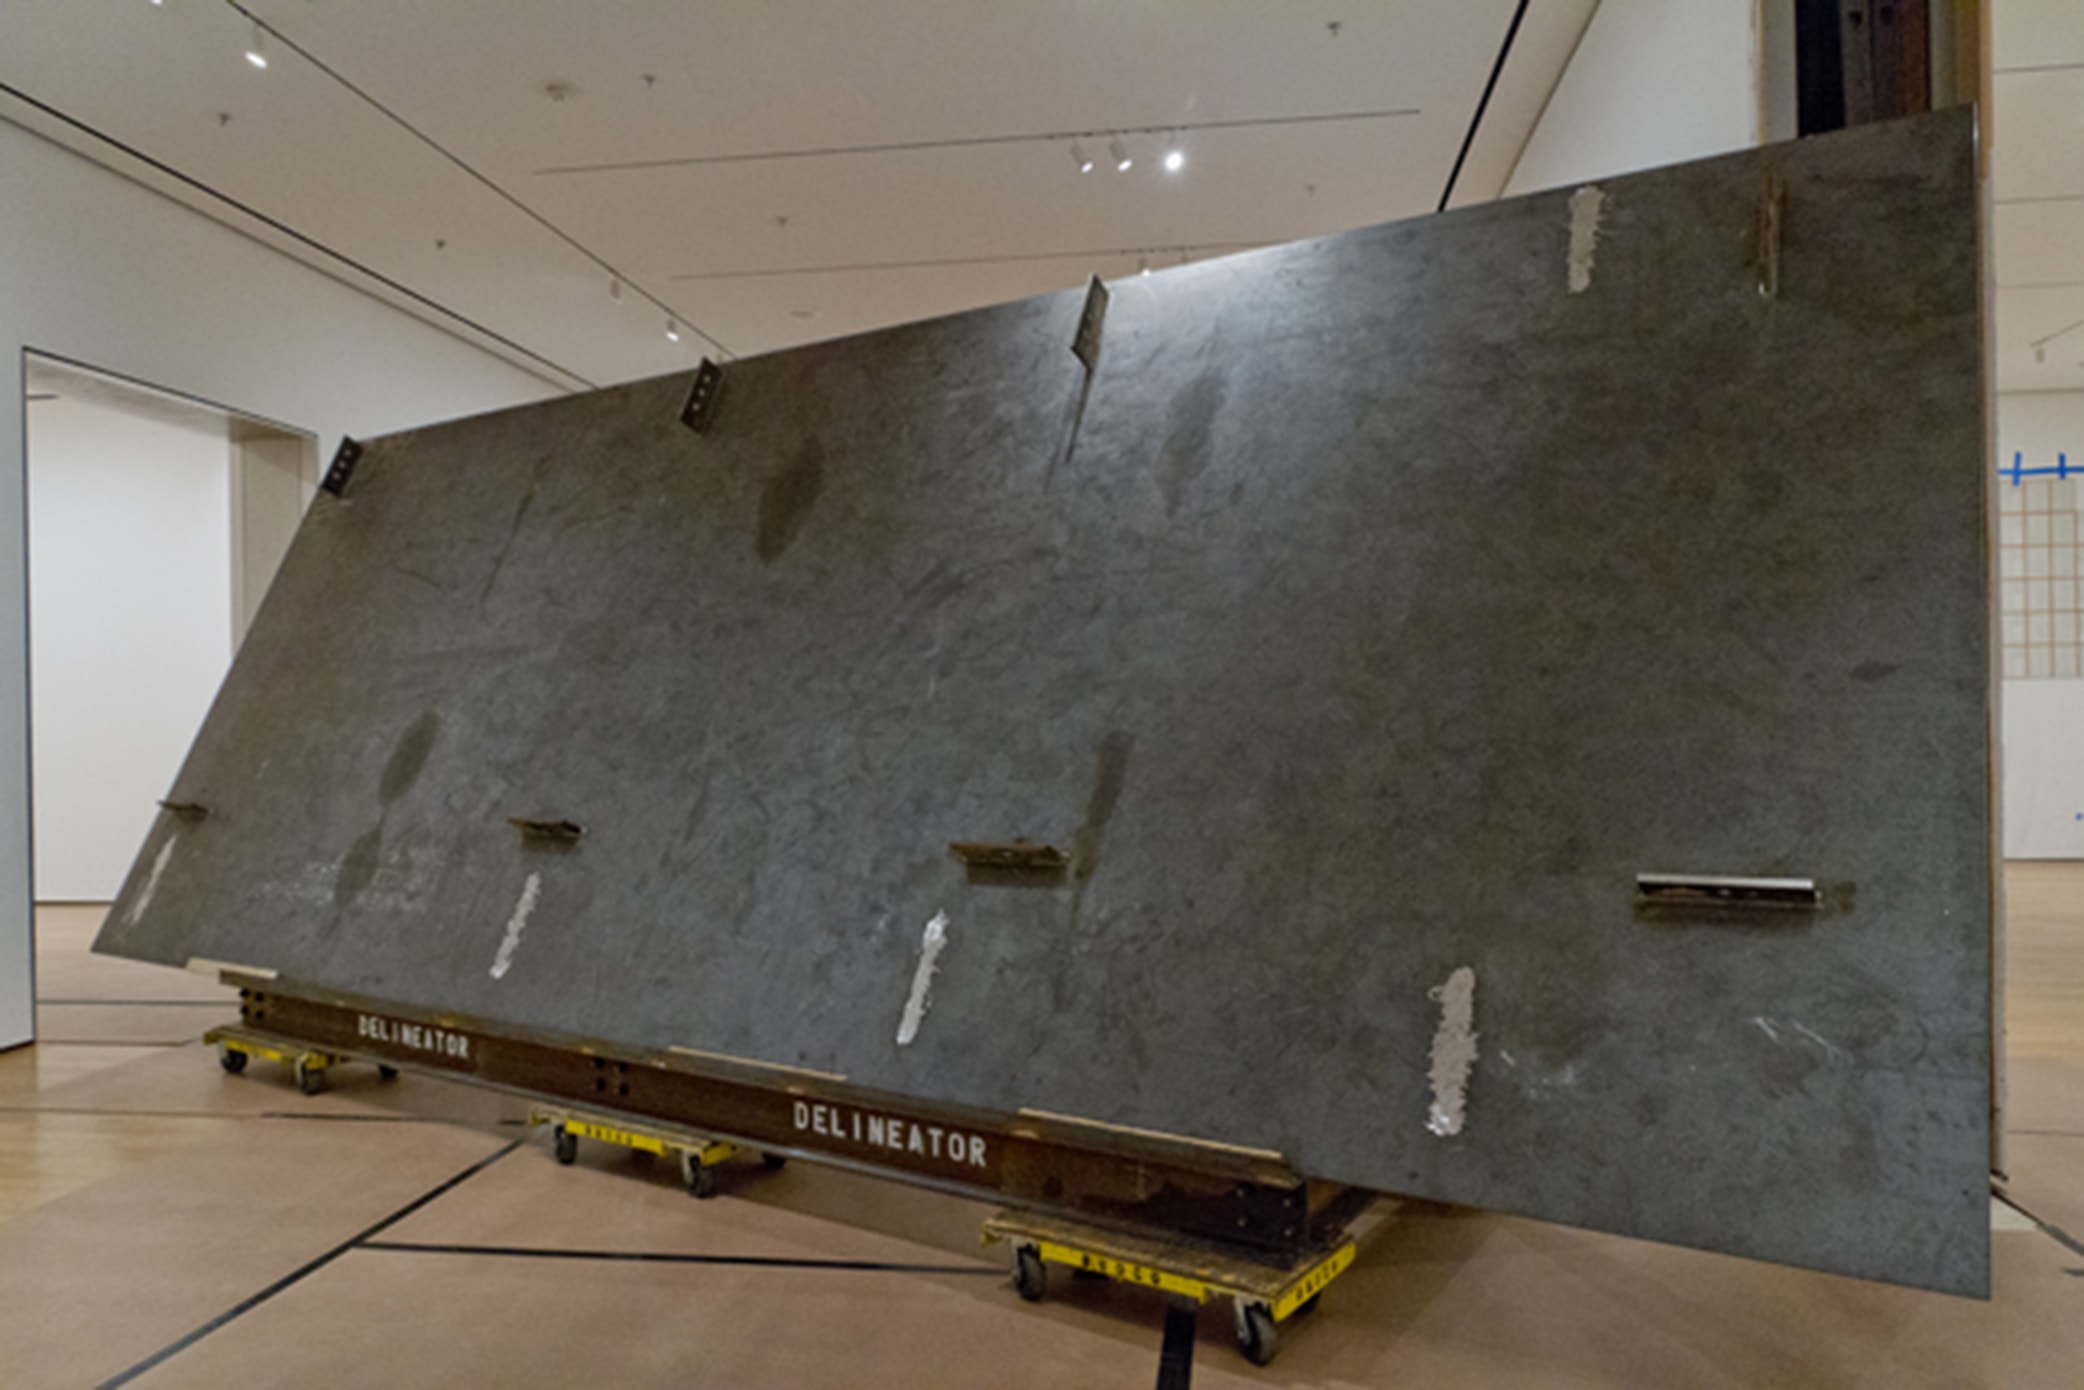 Richard Serra's Delineator Moving Through the Gallery